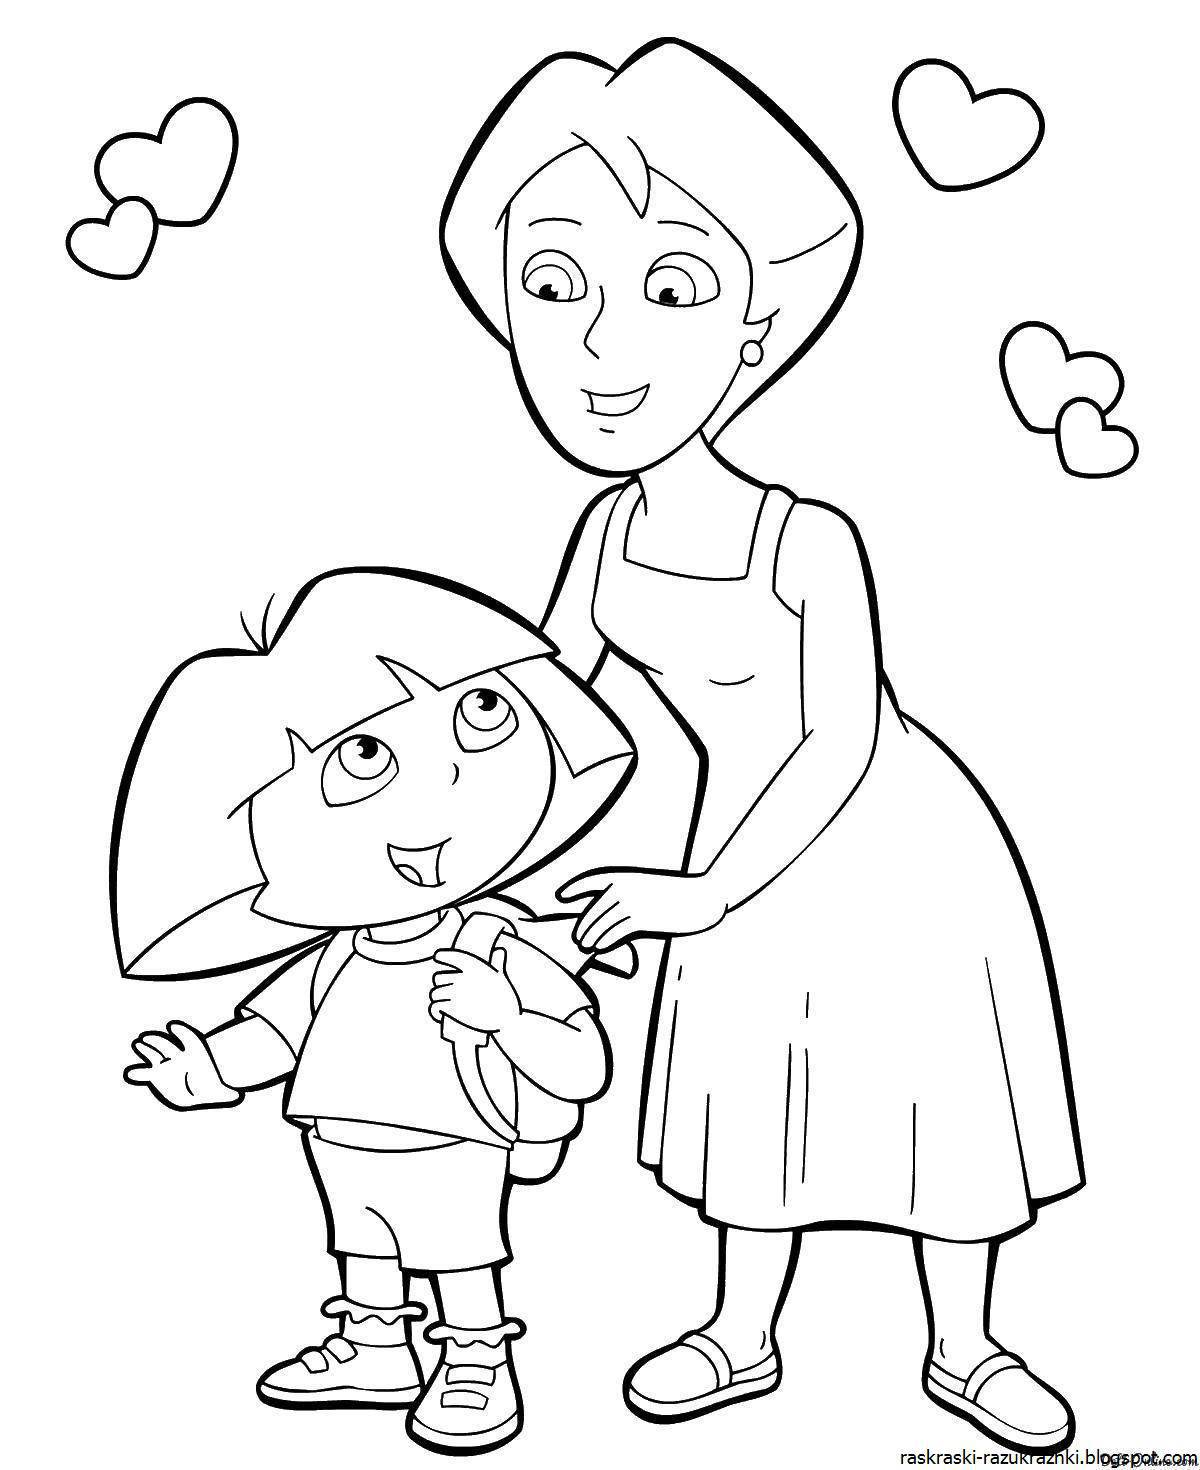 Sky mother coloring page